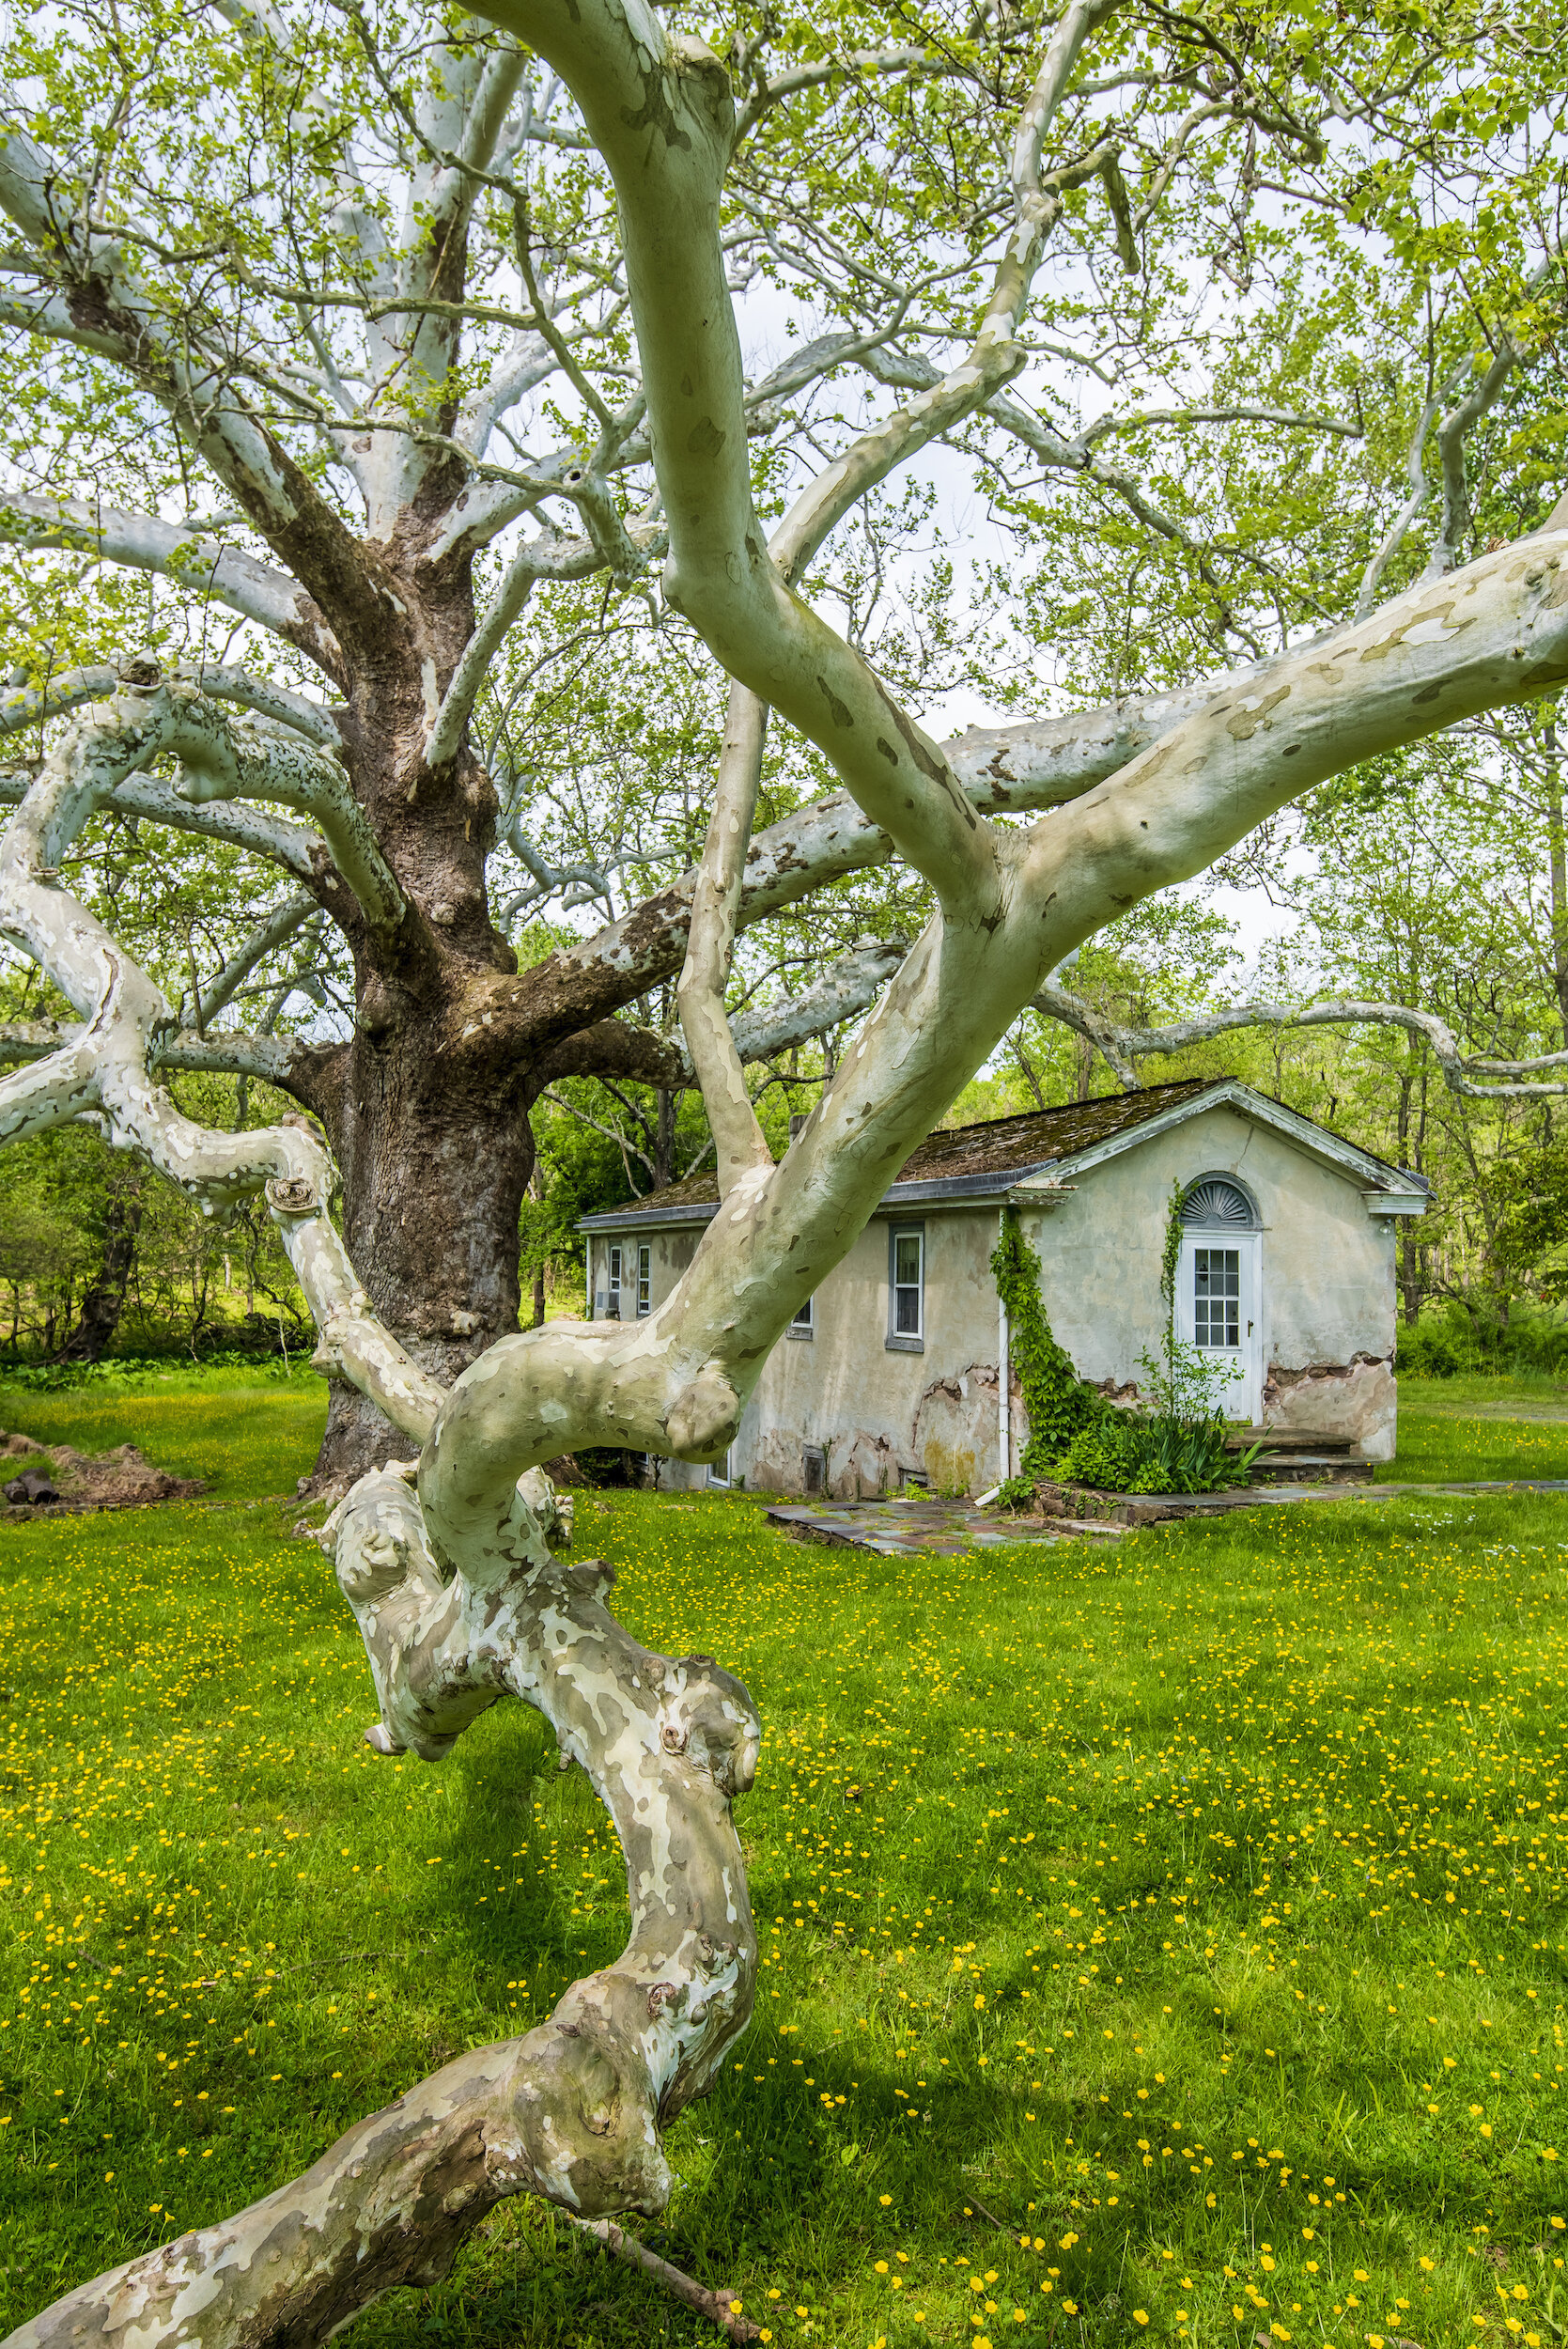  The Pawling Sycamore, a “witness tree,” is believed to have been alive when the Continental Army arrived at Valley Forge in 1777. 